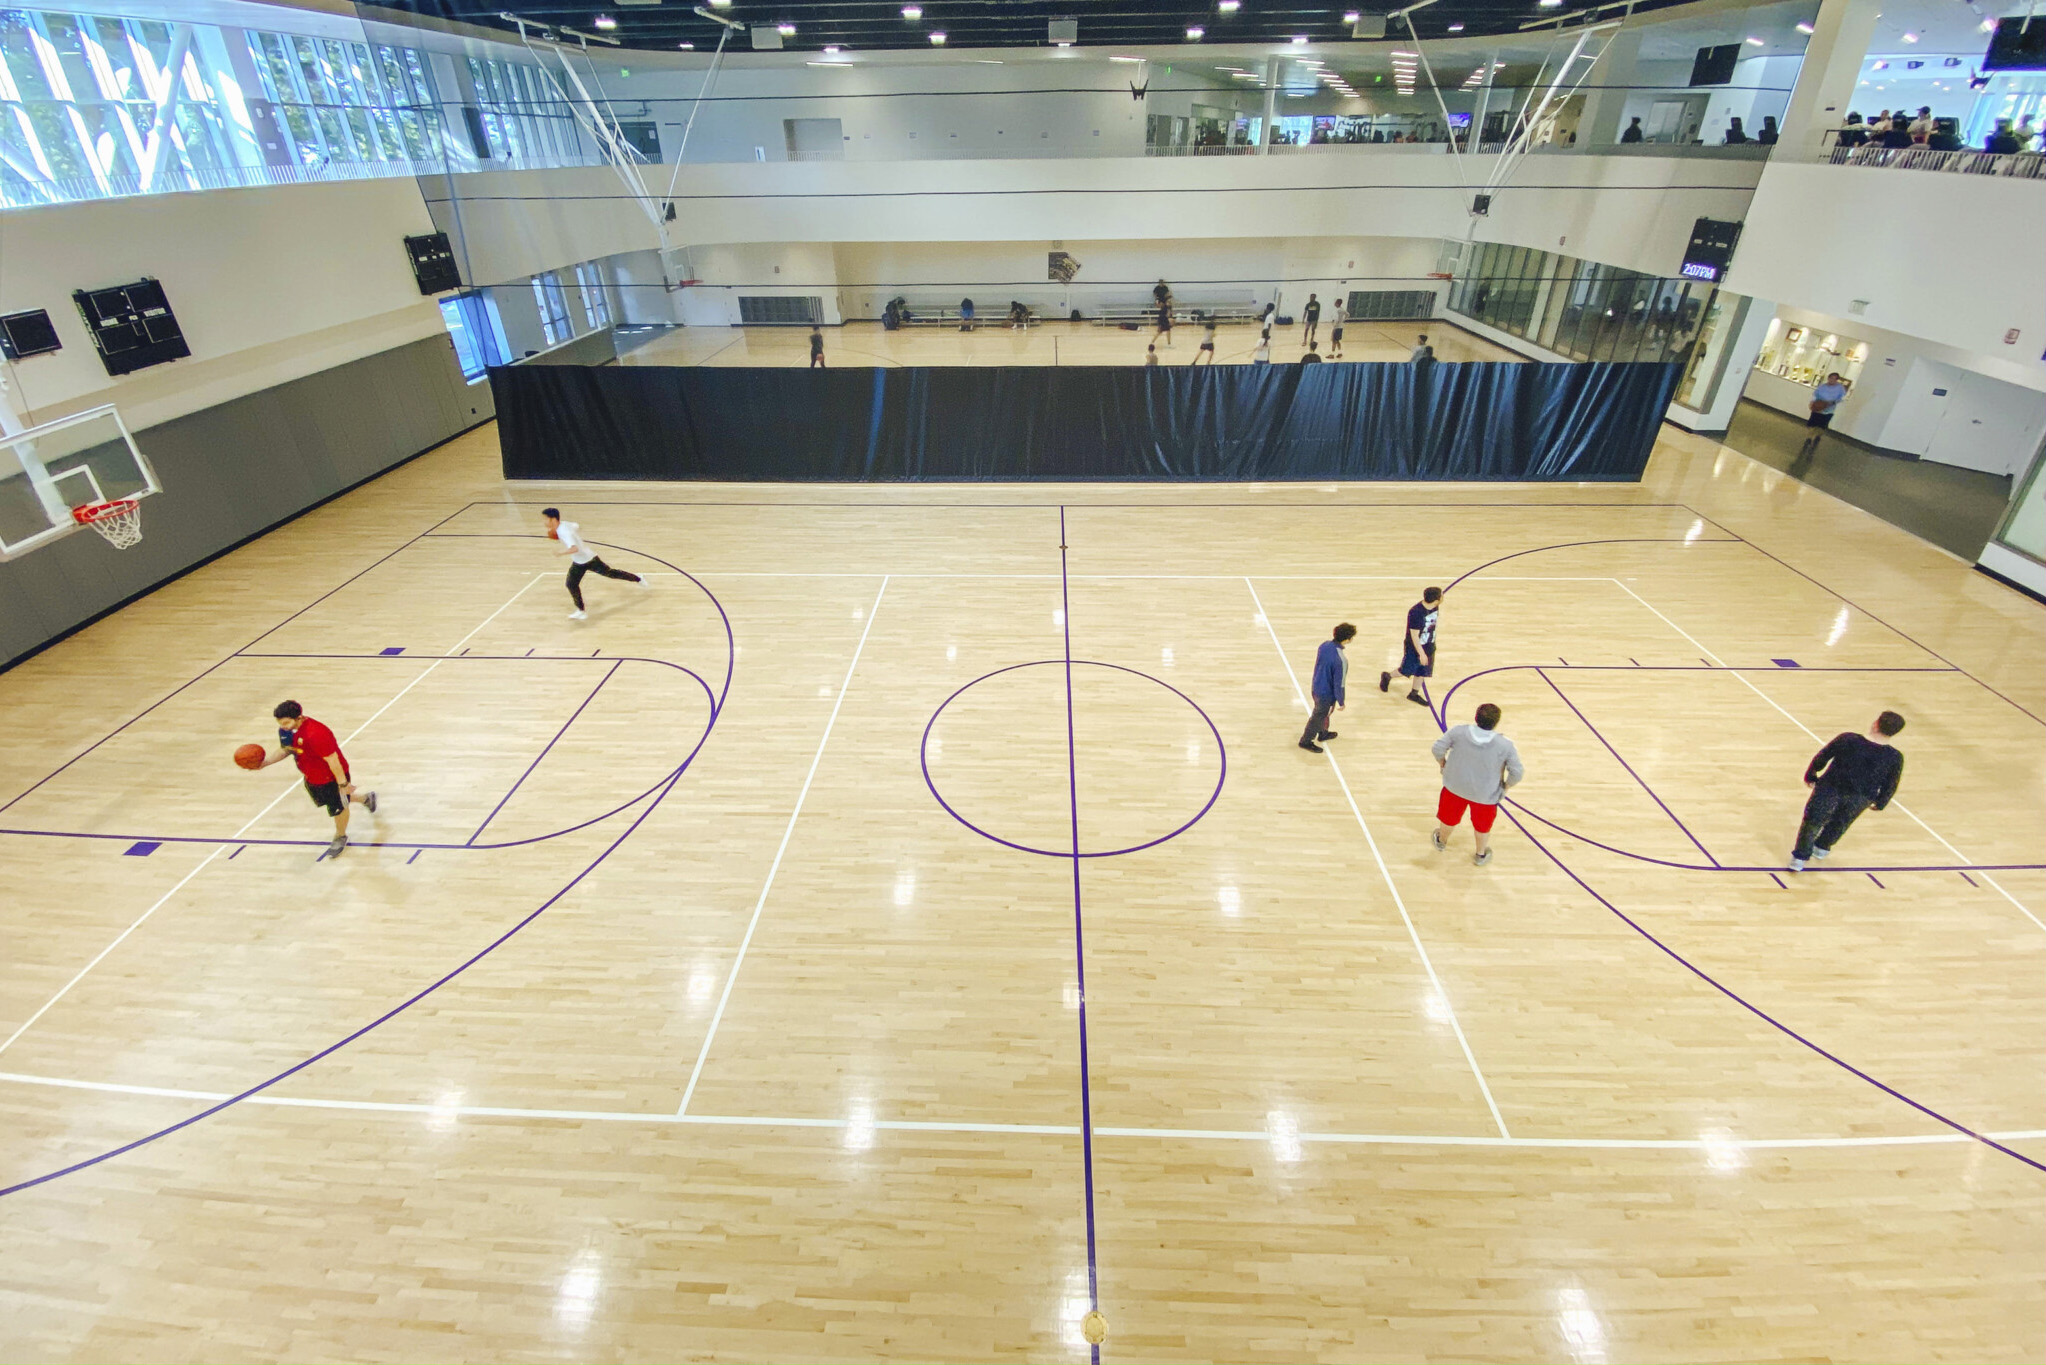 One of the two-court gyms at the Mashouf Wellness Center